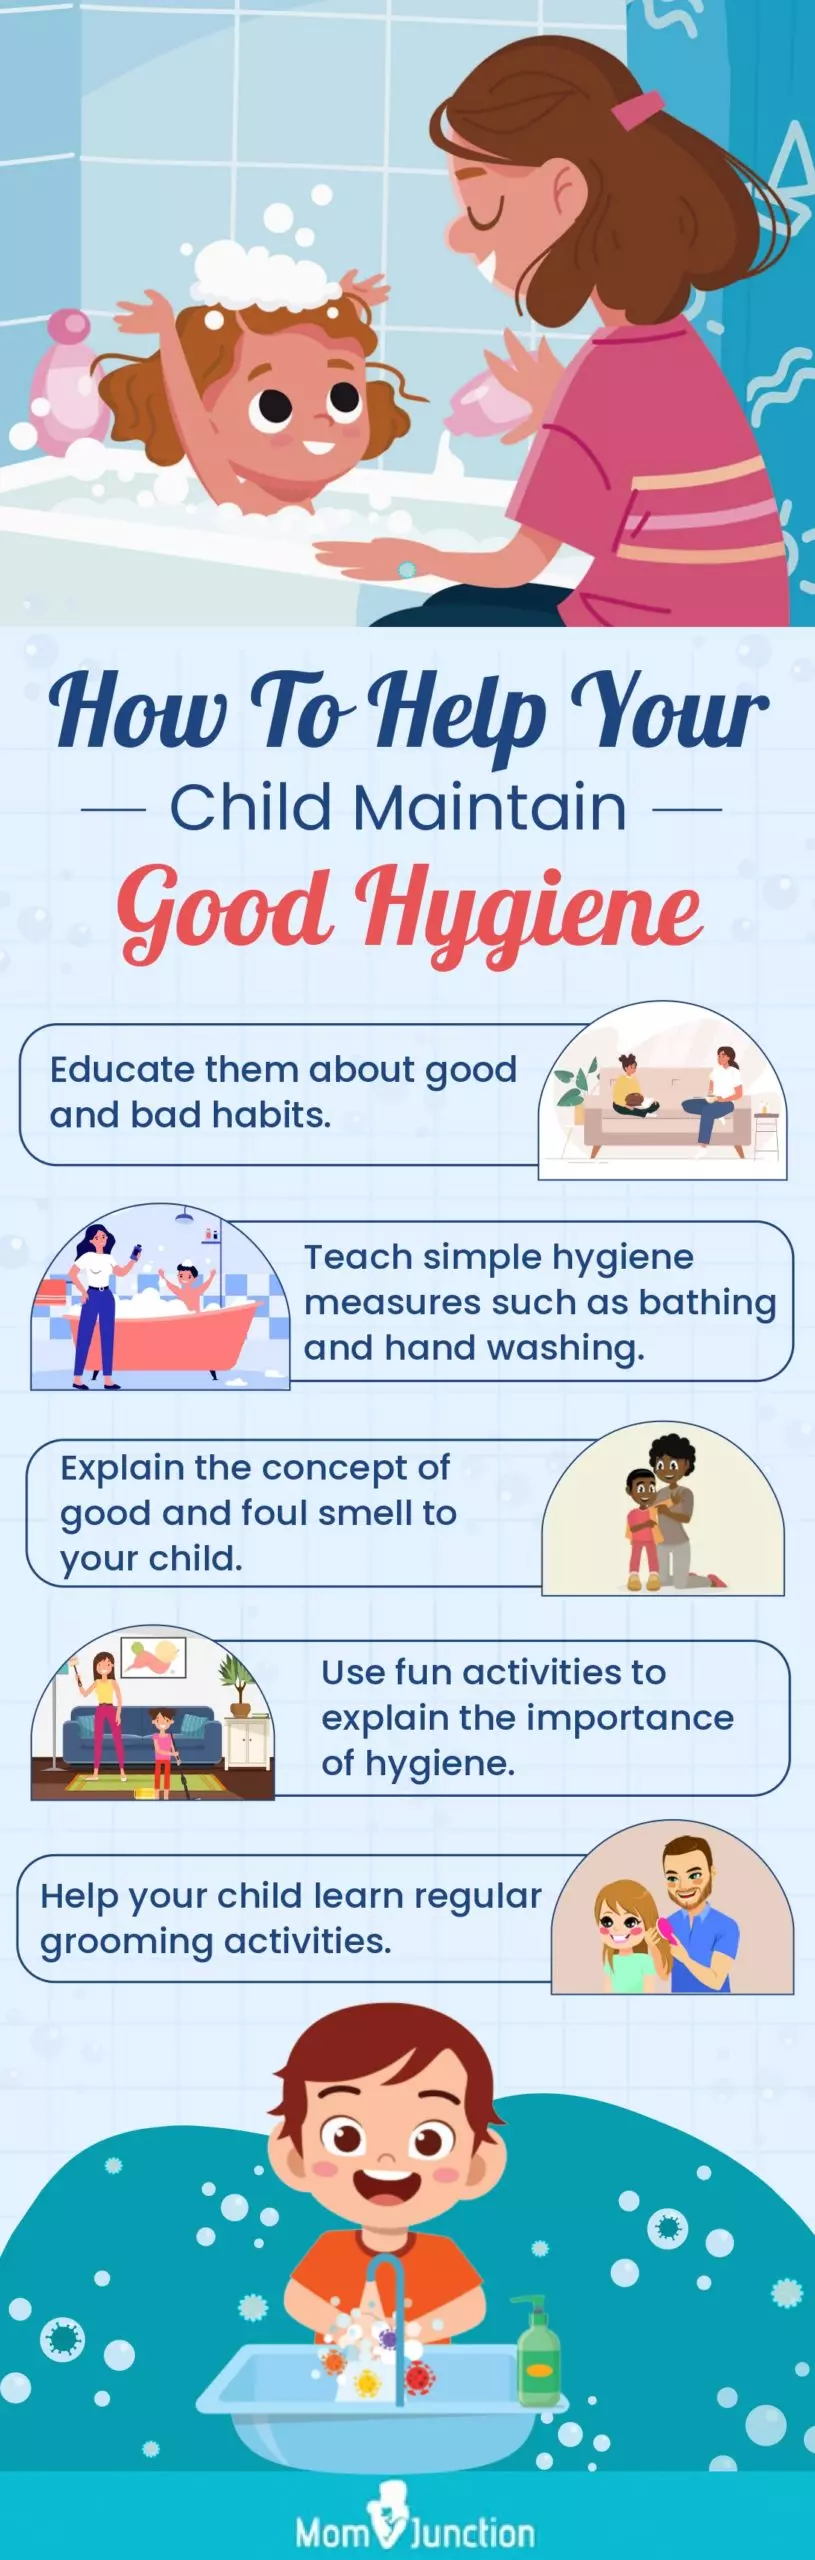 how to help your child maintain good hygiene (infographic)